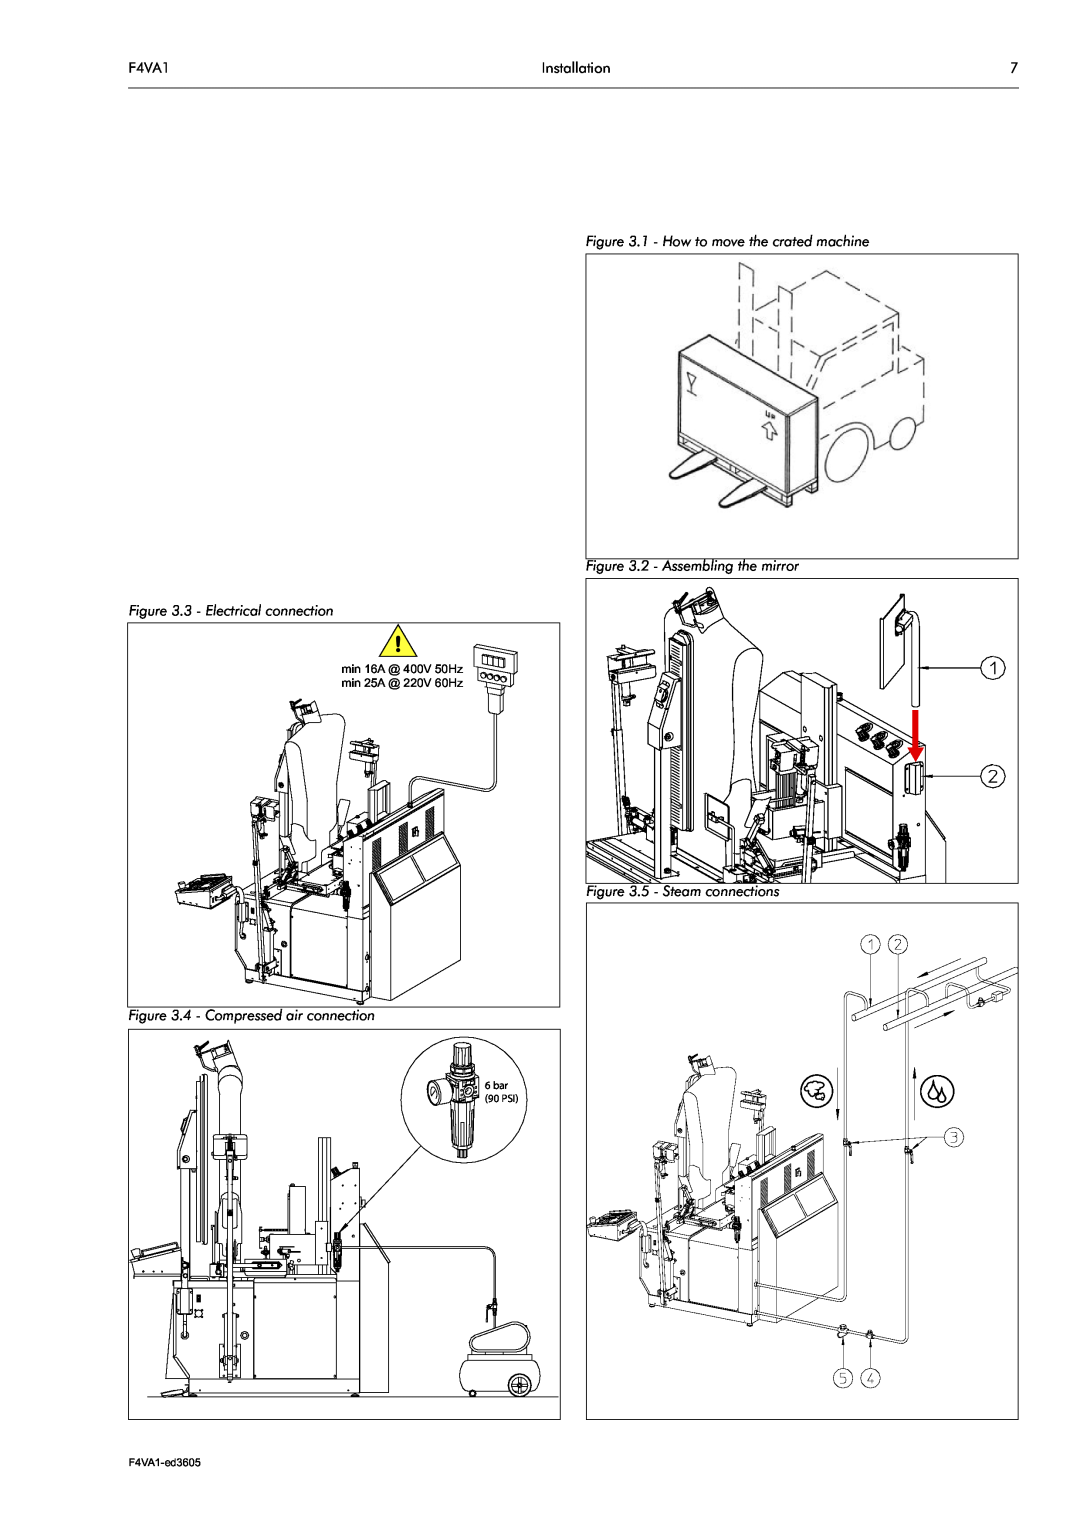 Electrolux F4VA1 manual 1 - How to move the crated machine, 3 - Electrical connection, 4 - Compressed air connection 